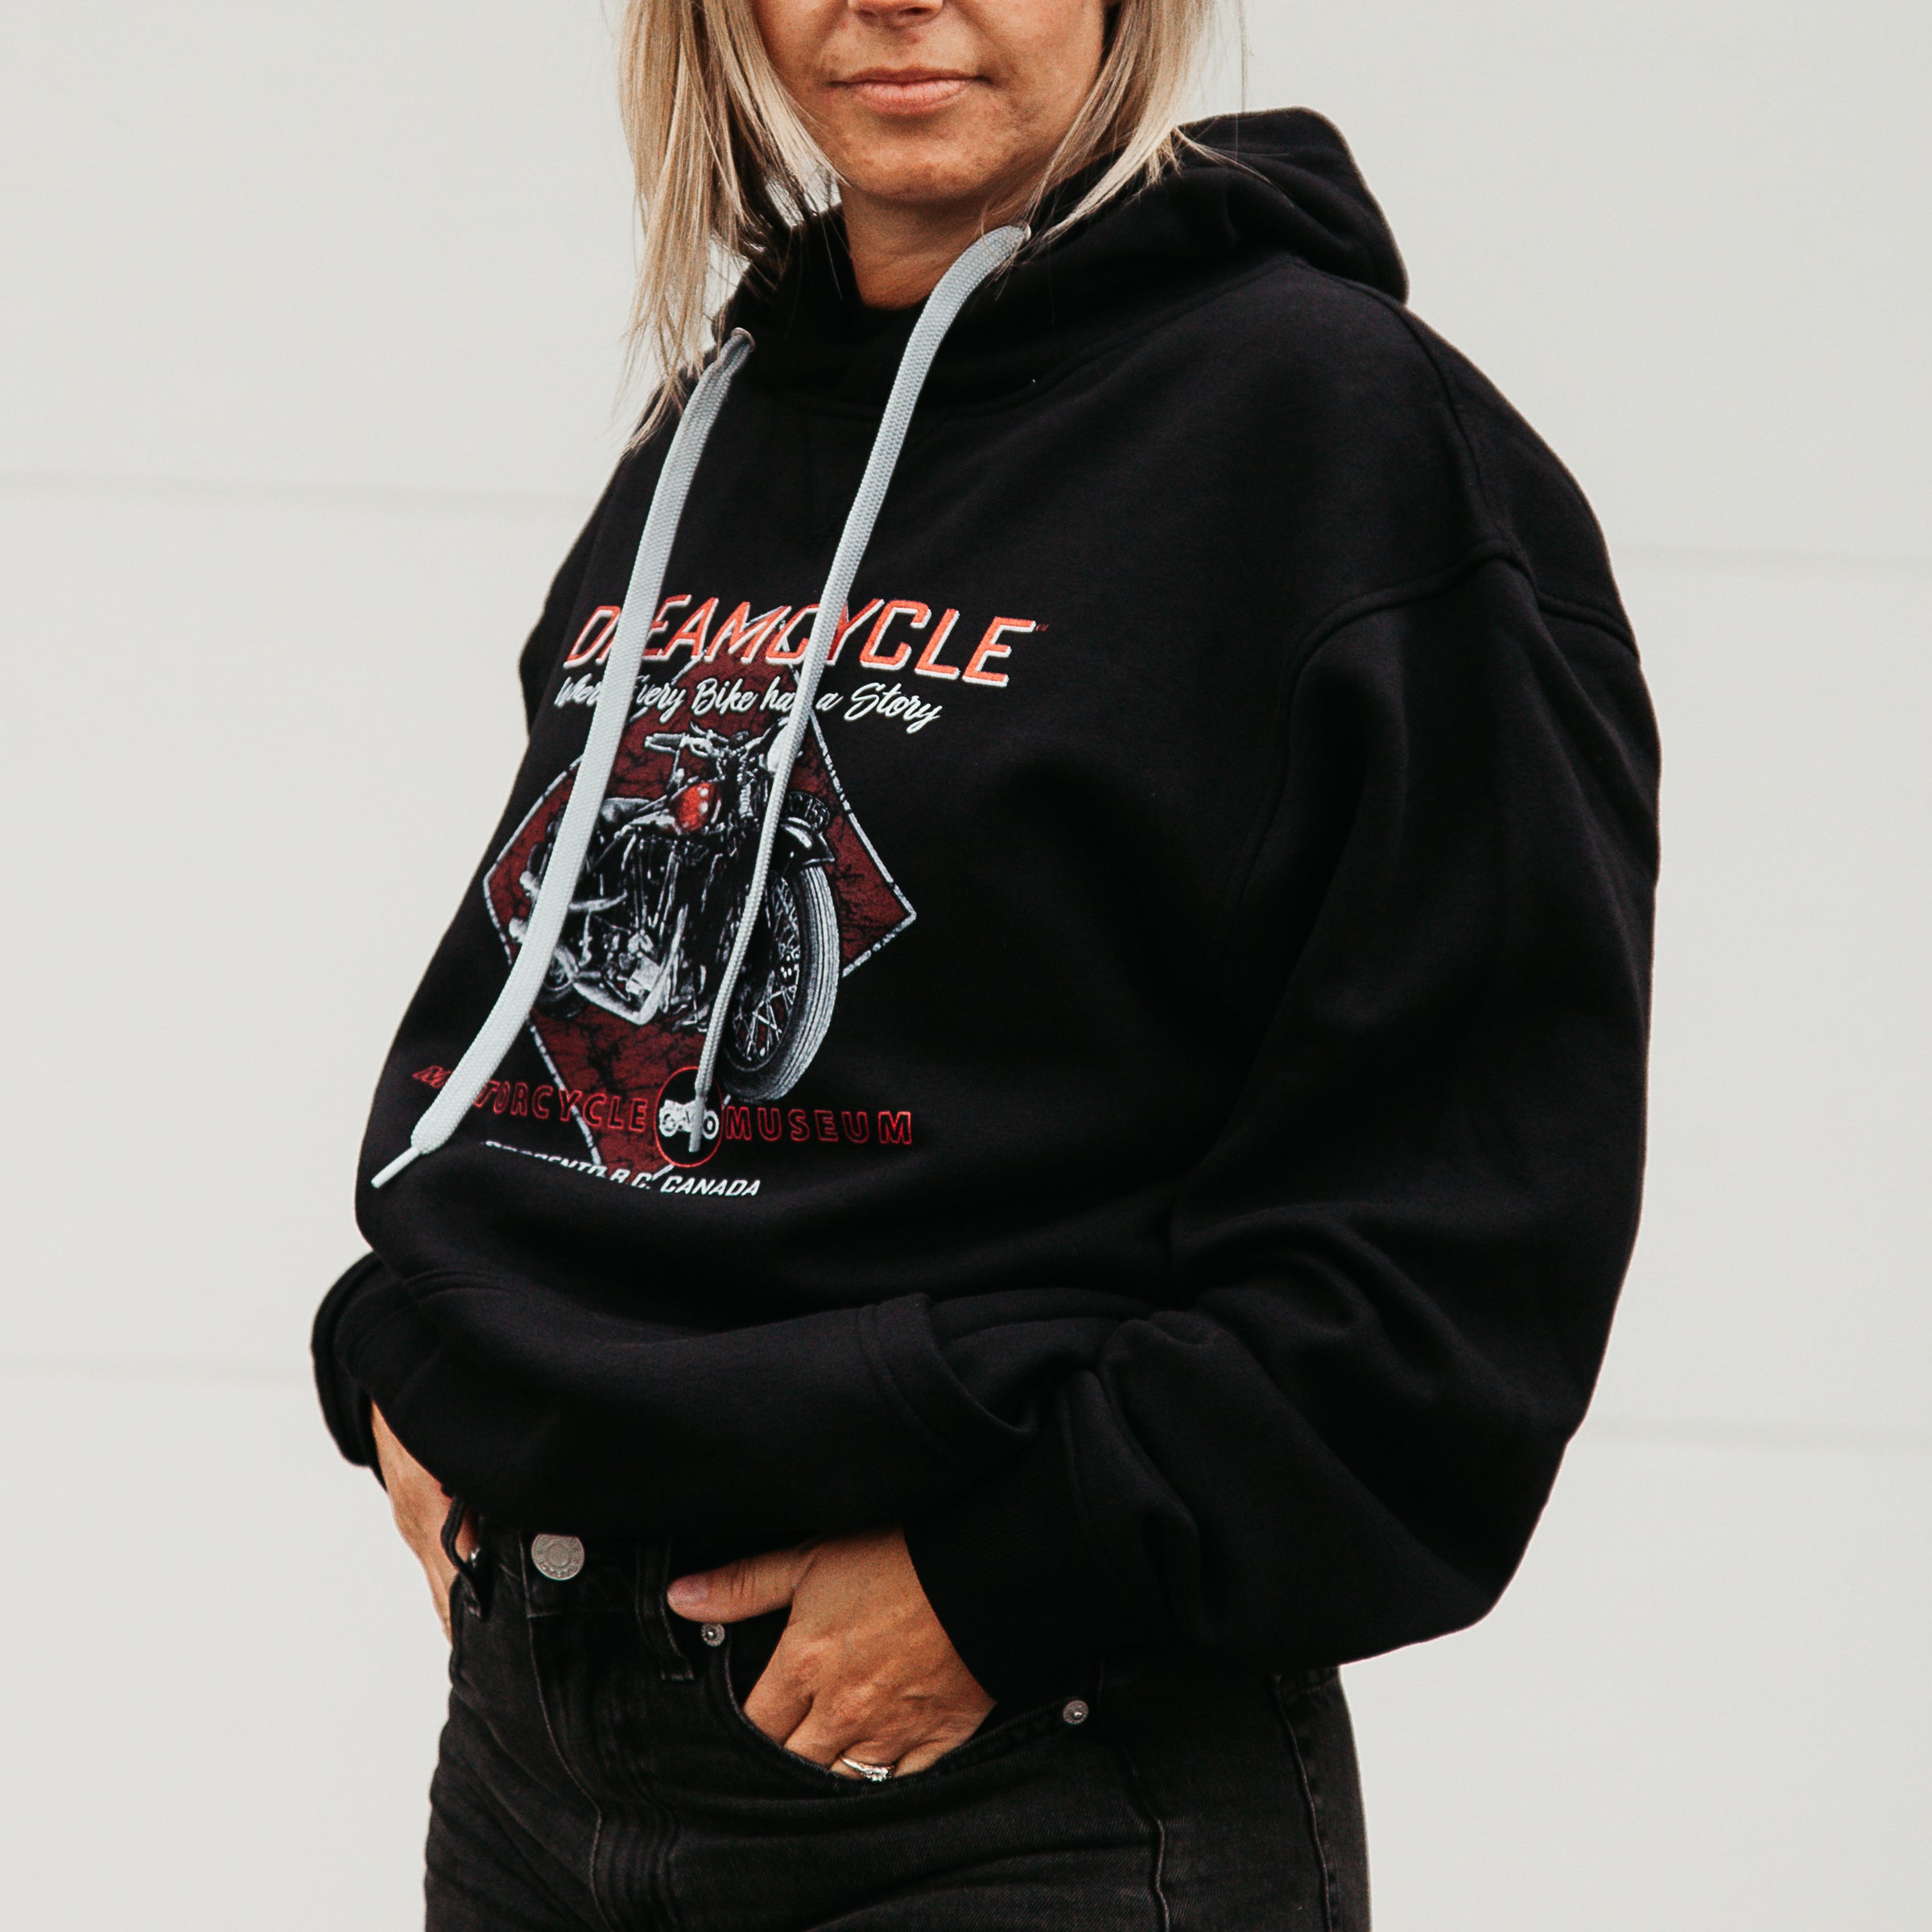  Dreamcycle Motorcycle Museum |  Female modeling black dreamcycle hoodie in a lifestyle environment.